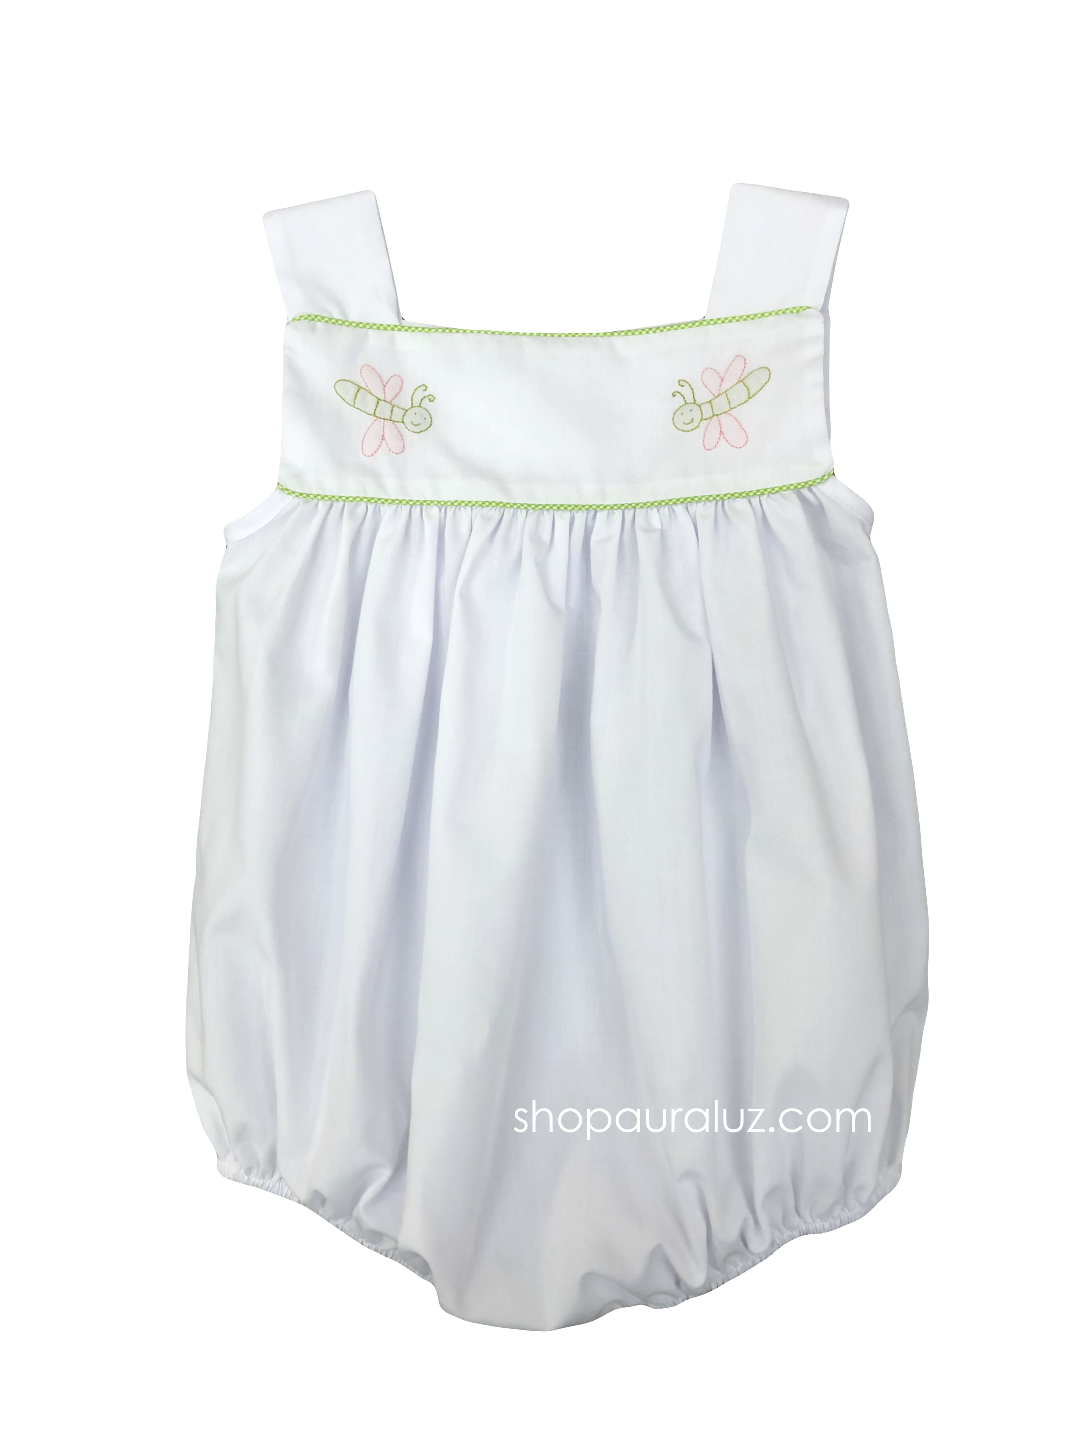 Auraluz Girl Sun Bubble...White with lime check trim and embroidered dragonflies